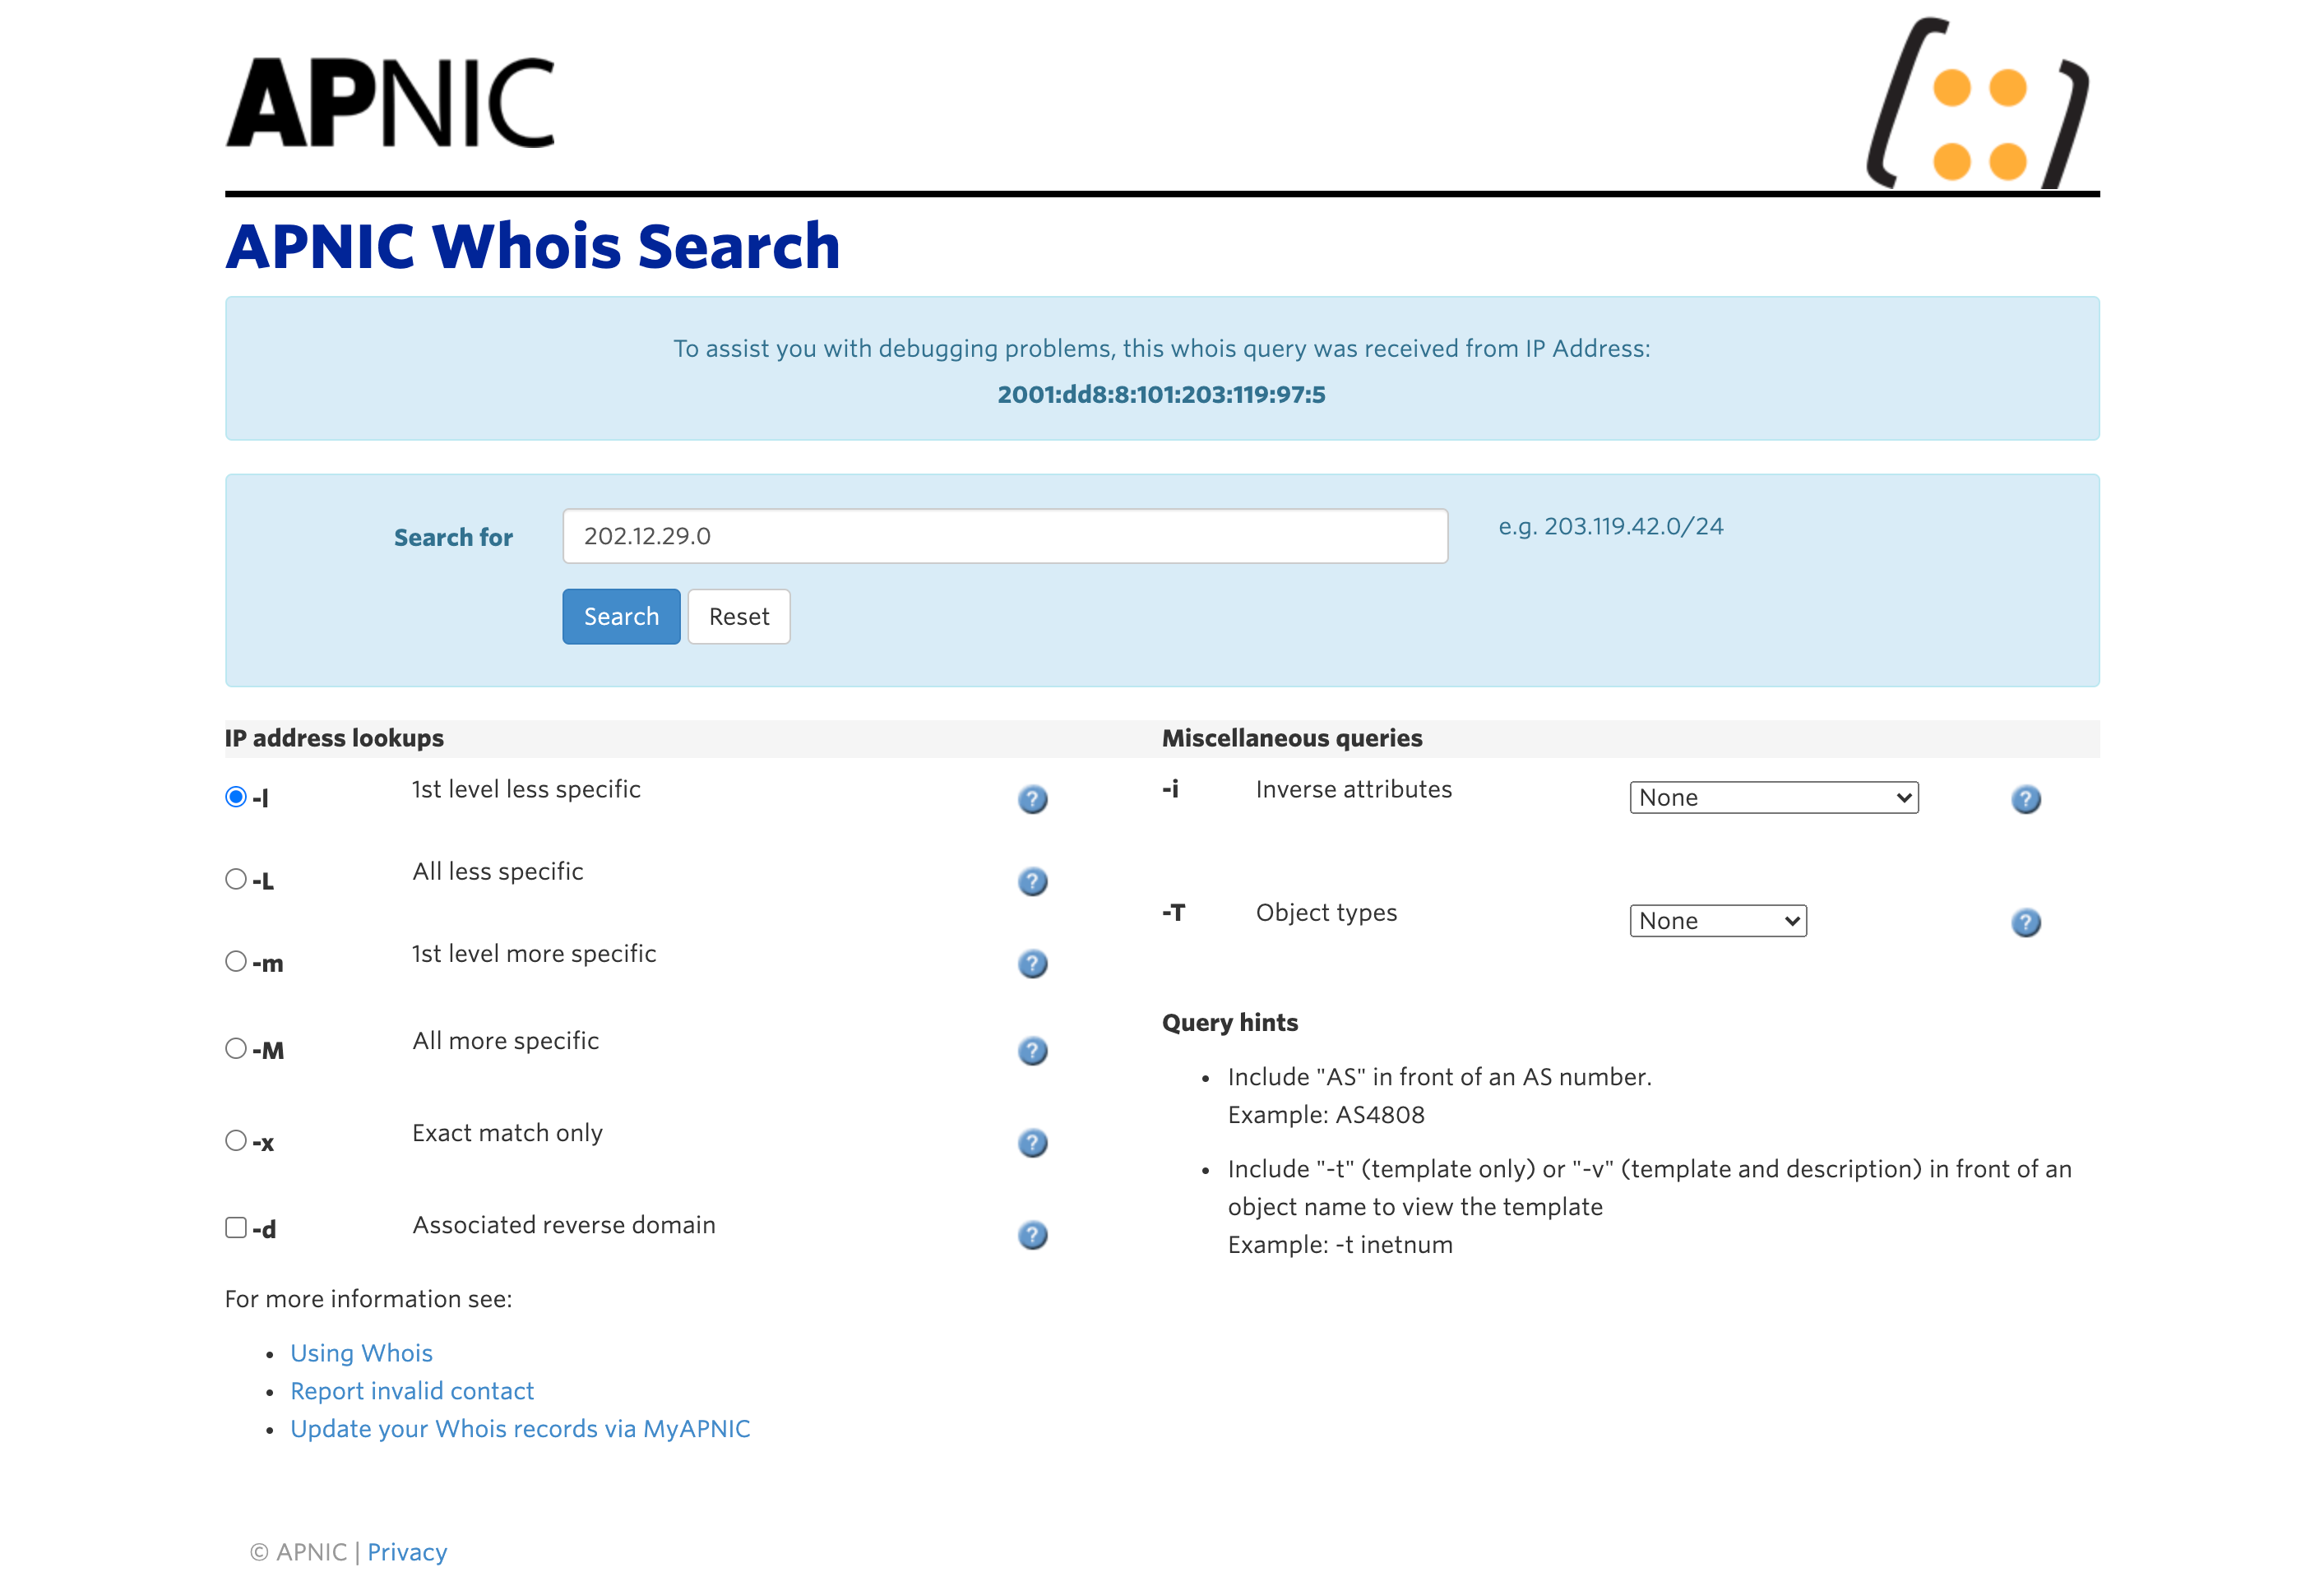 How to Look Up WHOIS Information for any Domain